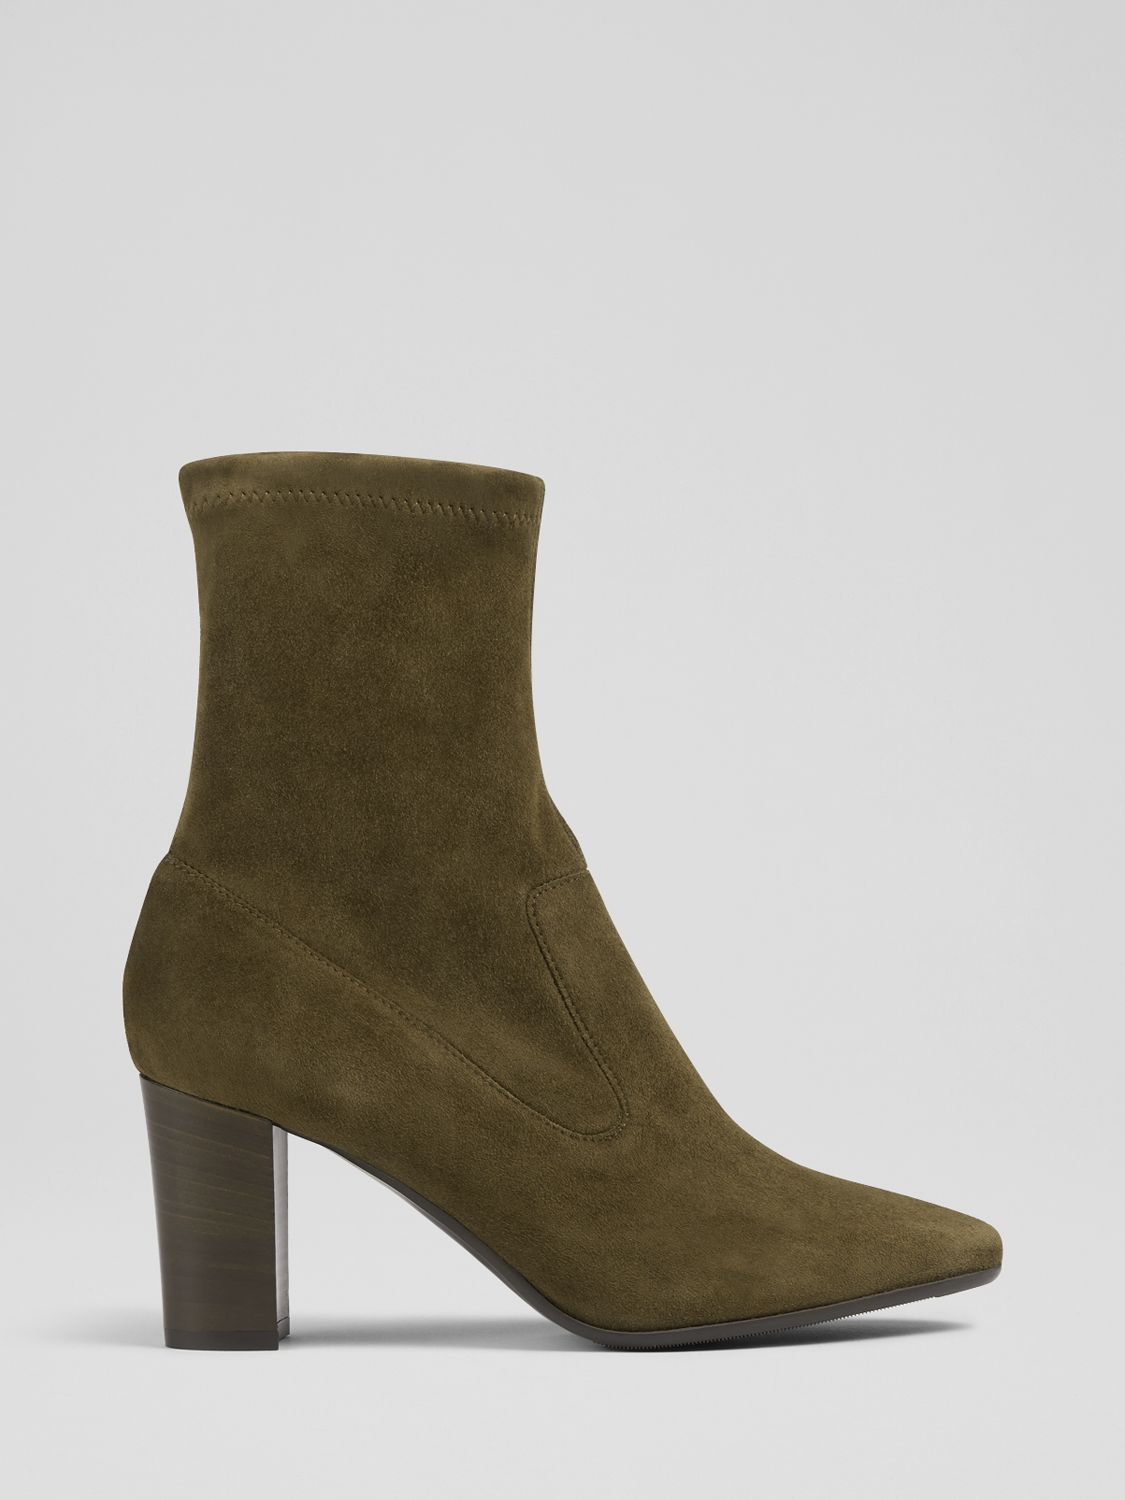 L.K.Bennett Alice Suede Ankle Boots, Olive at John Lewis & Partners